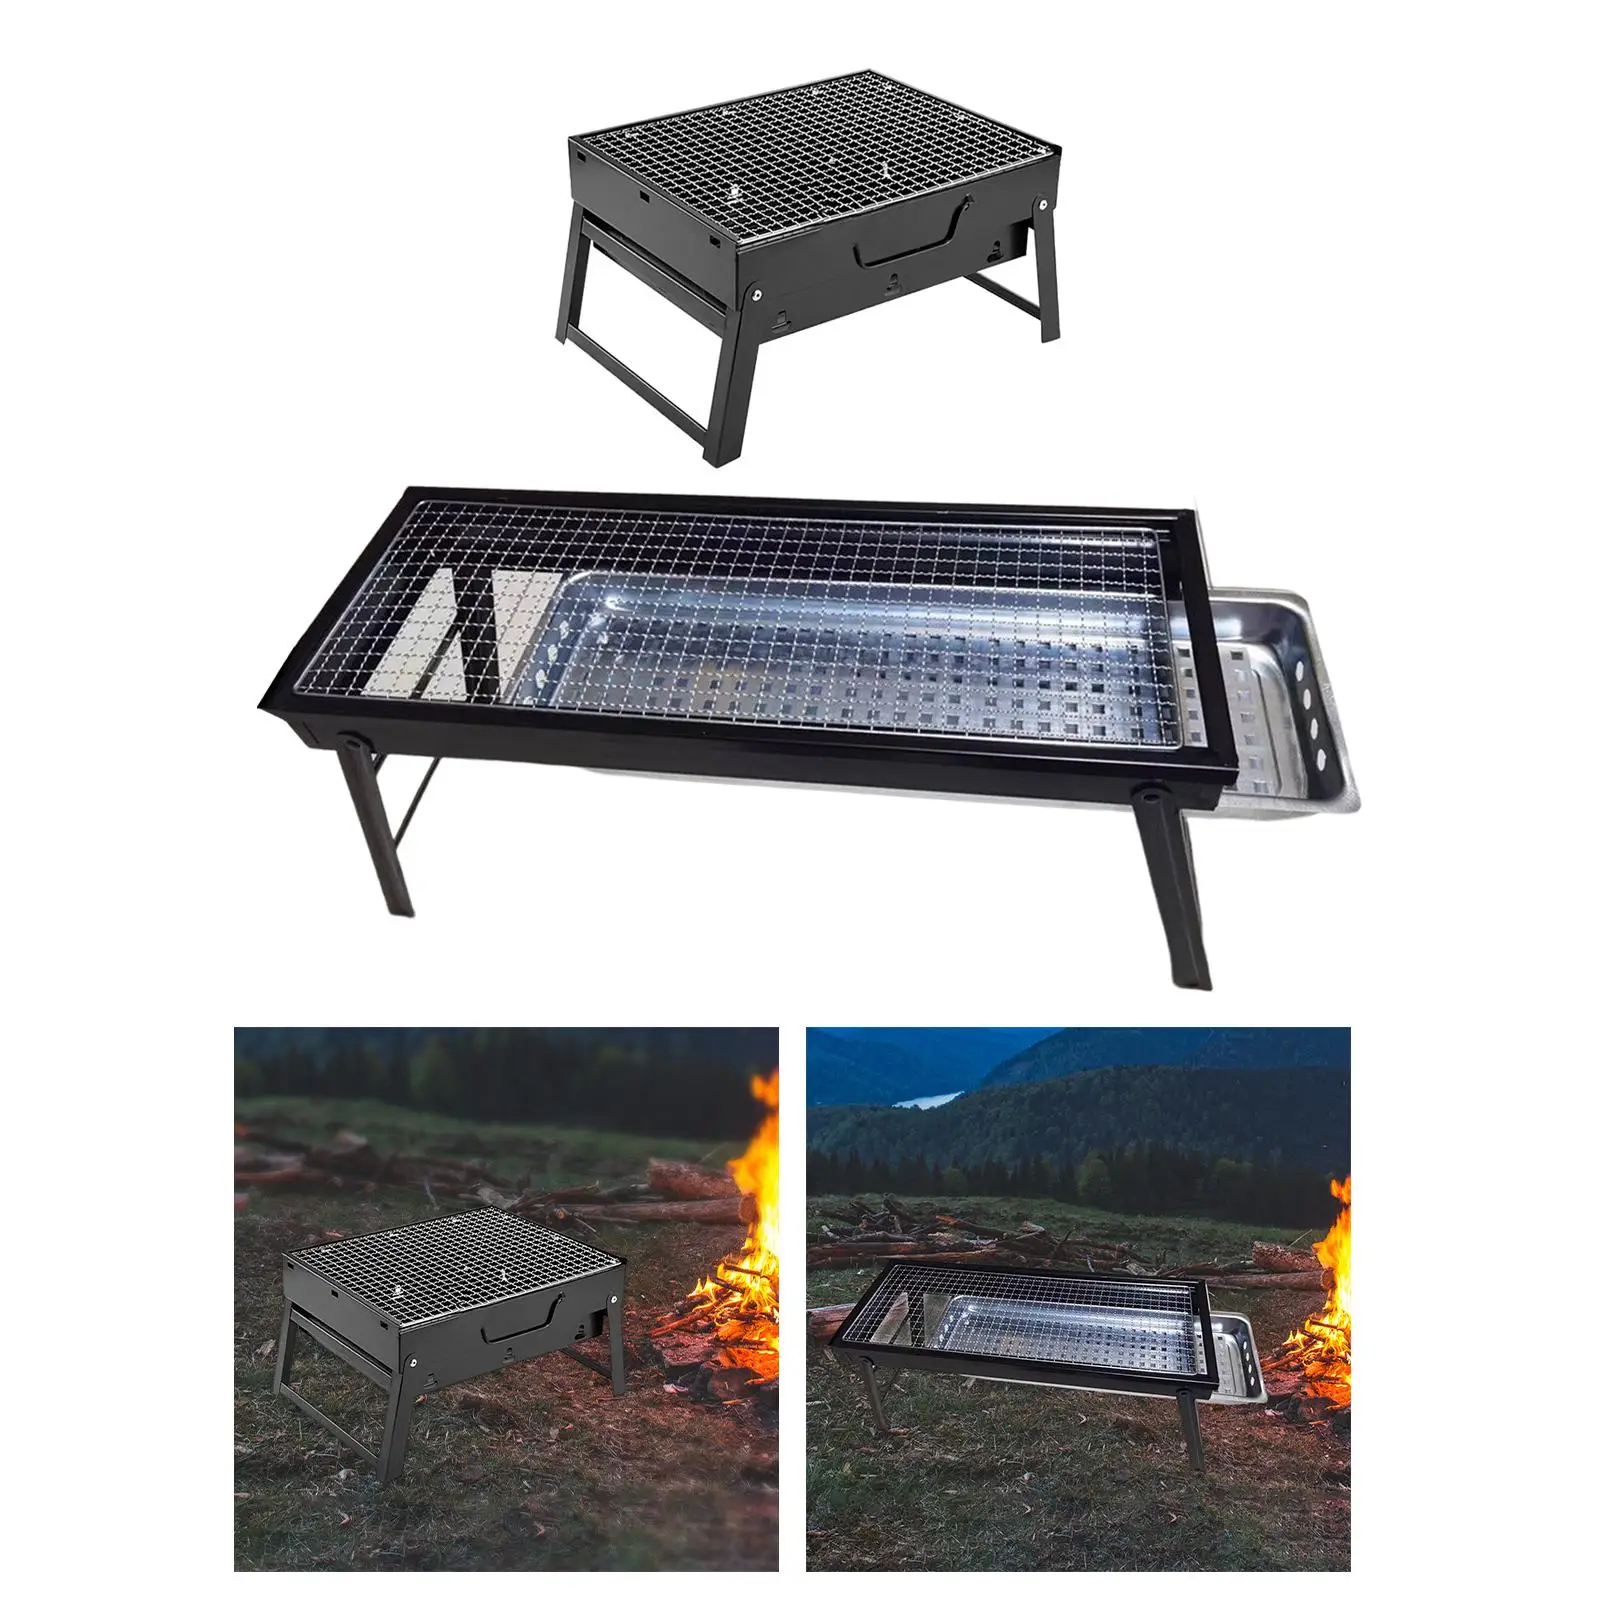 Portable BBQ Grill Stove Foldable Tabletop Barbecue Charcoal Grill for Outdoor Hiking BBQ Equipment Picnic